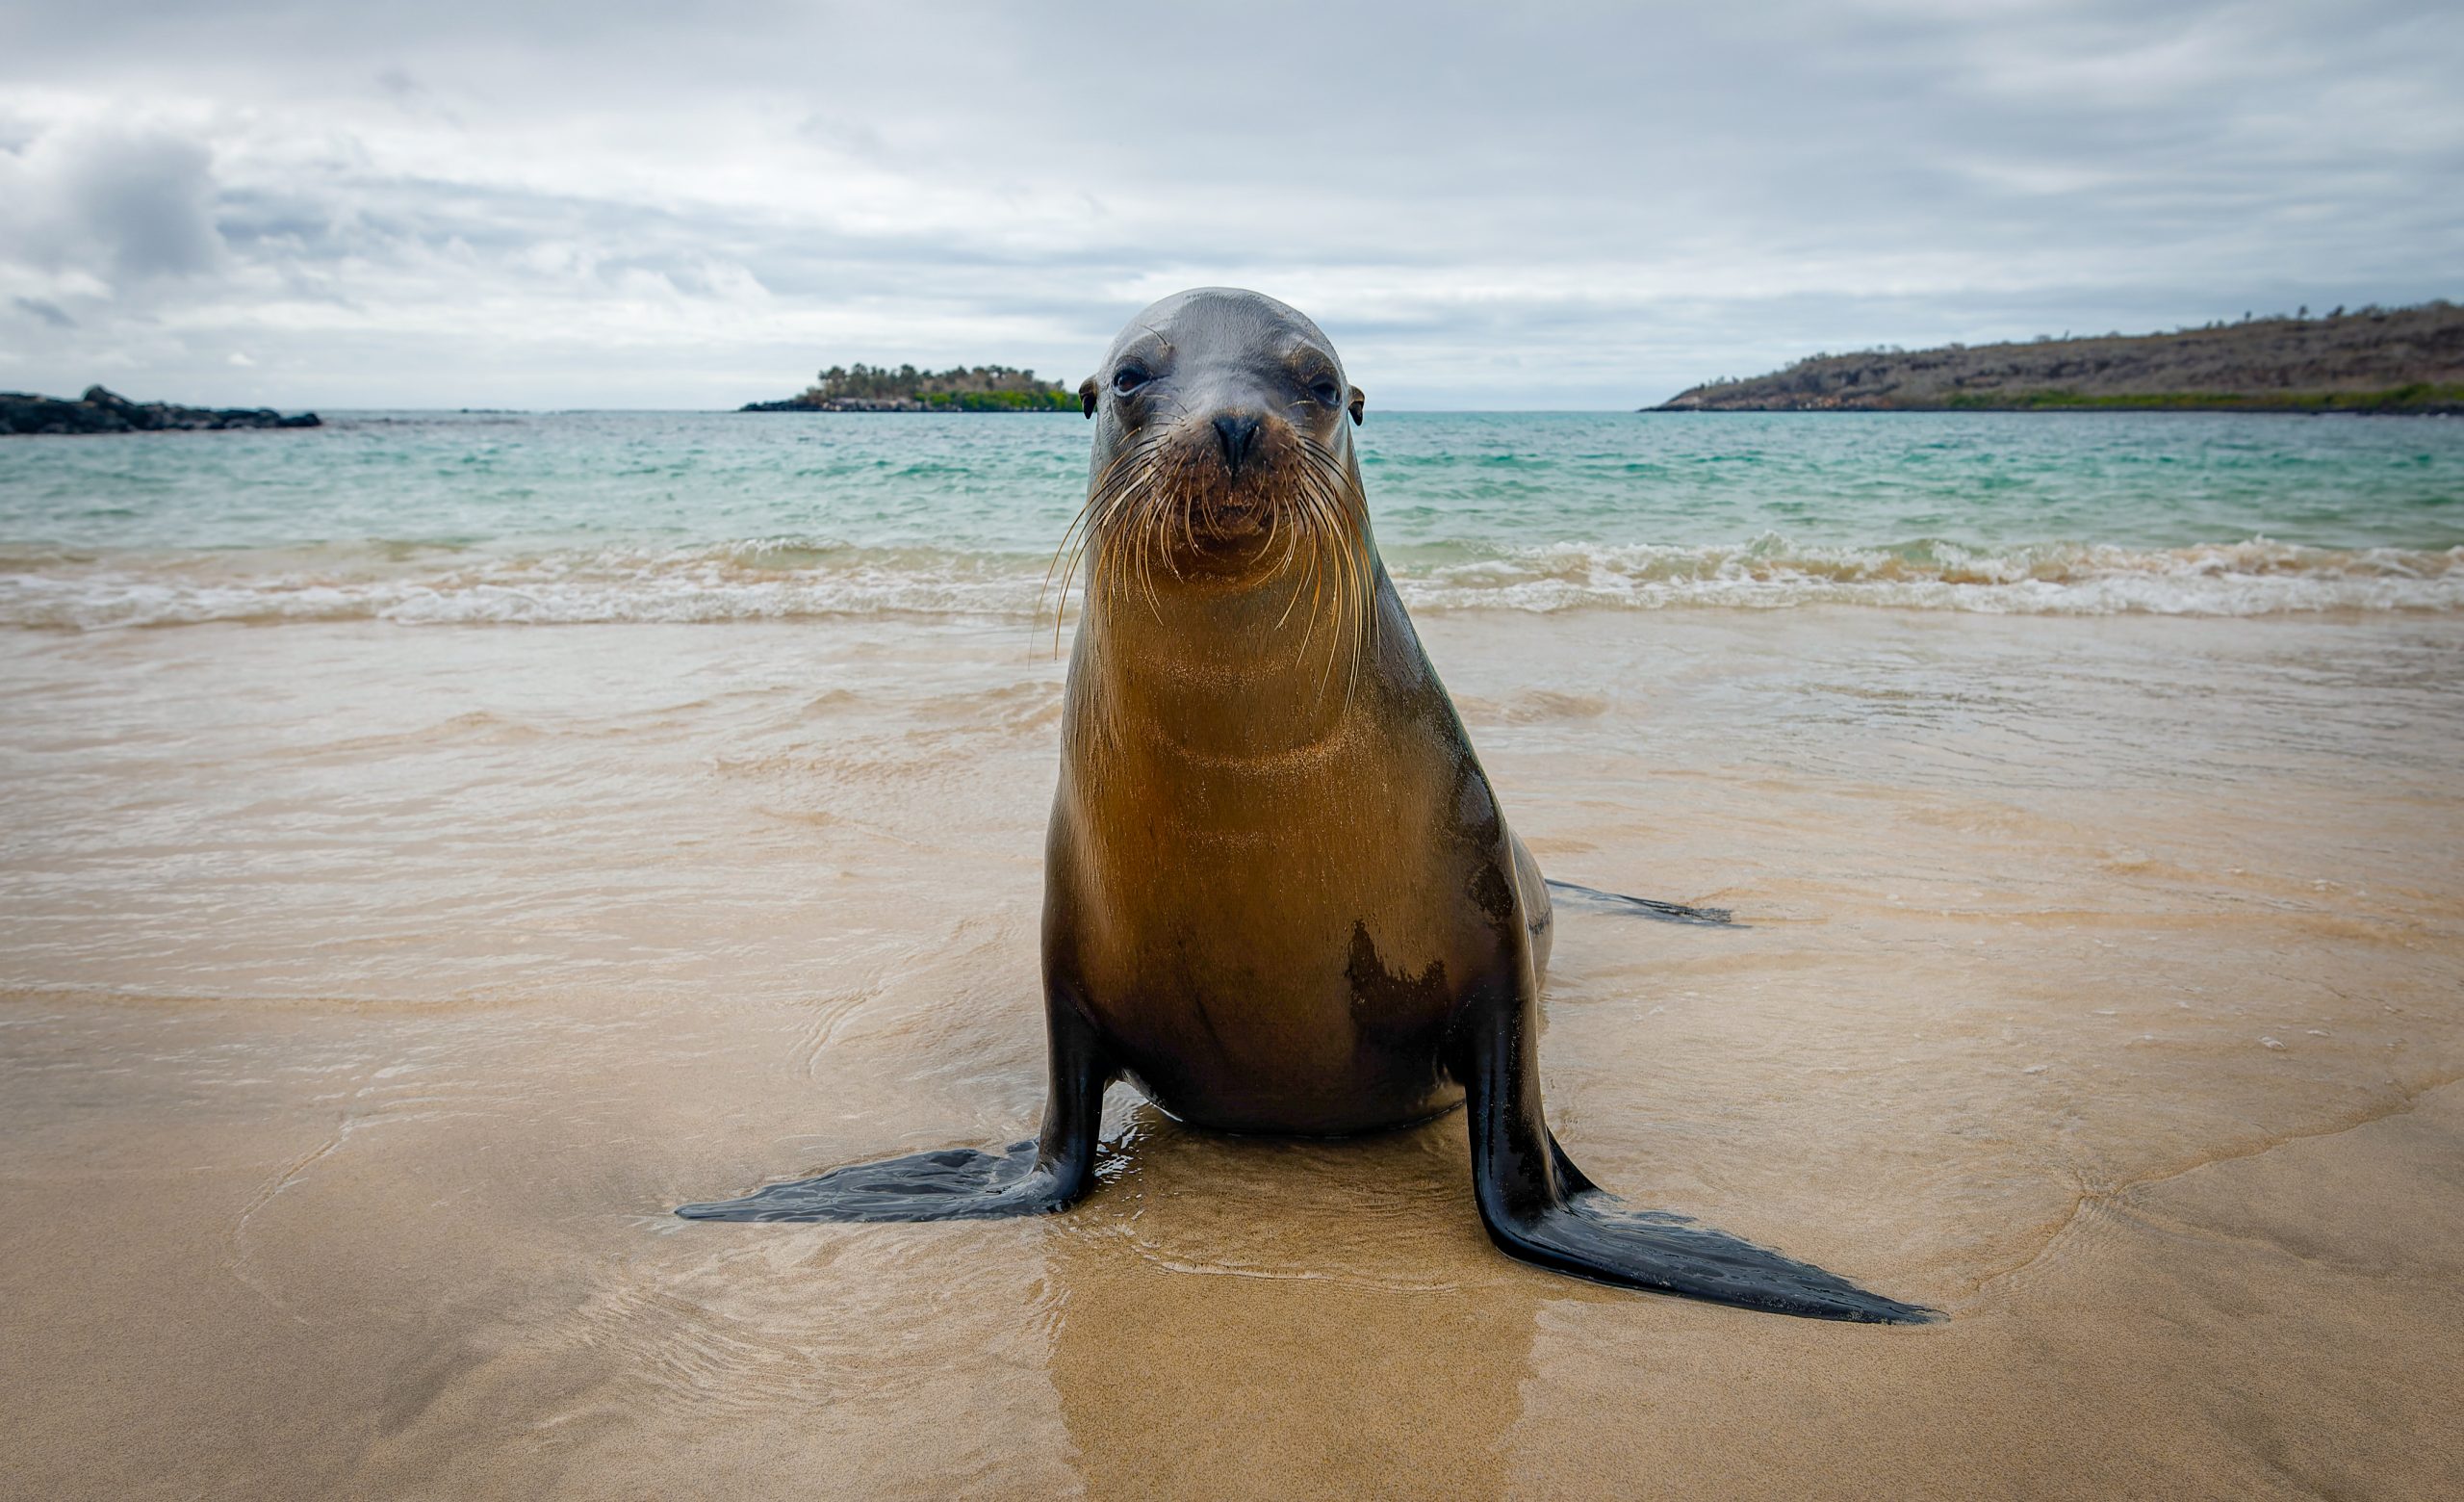 Galapagos Adventure – Overview, lessons learned, and what to expect